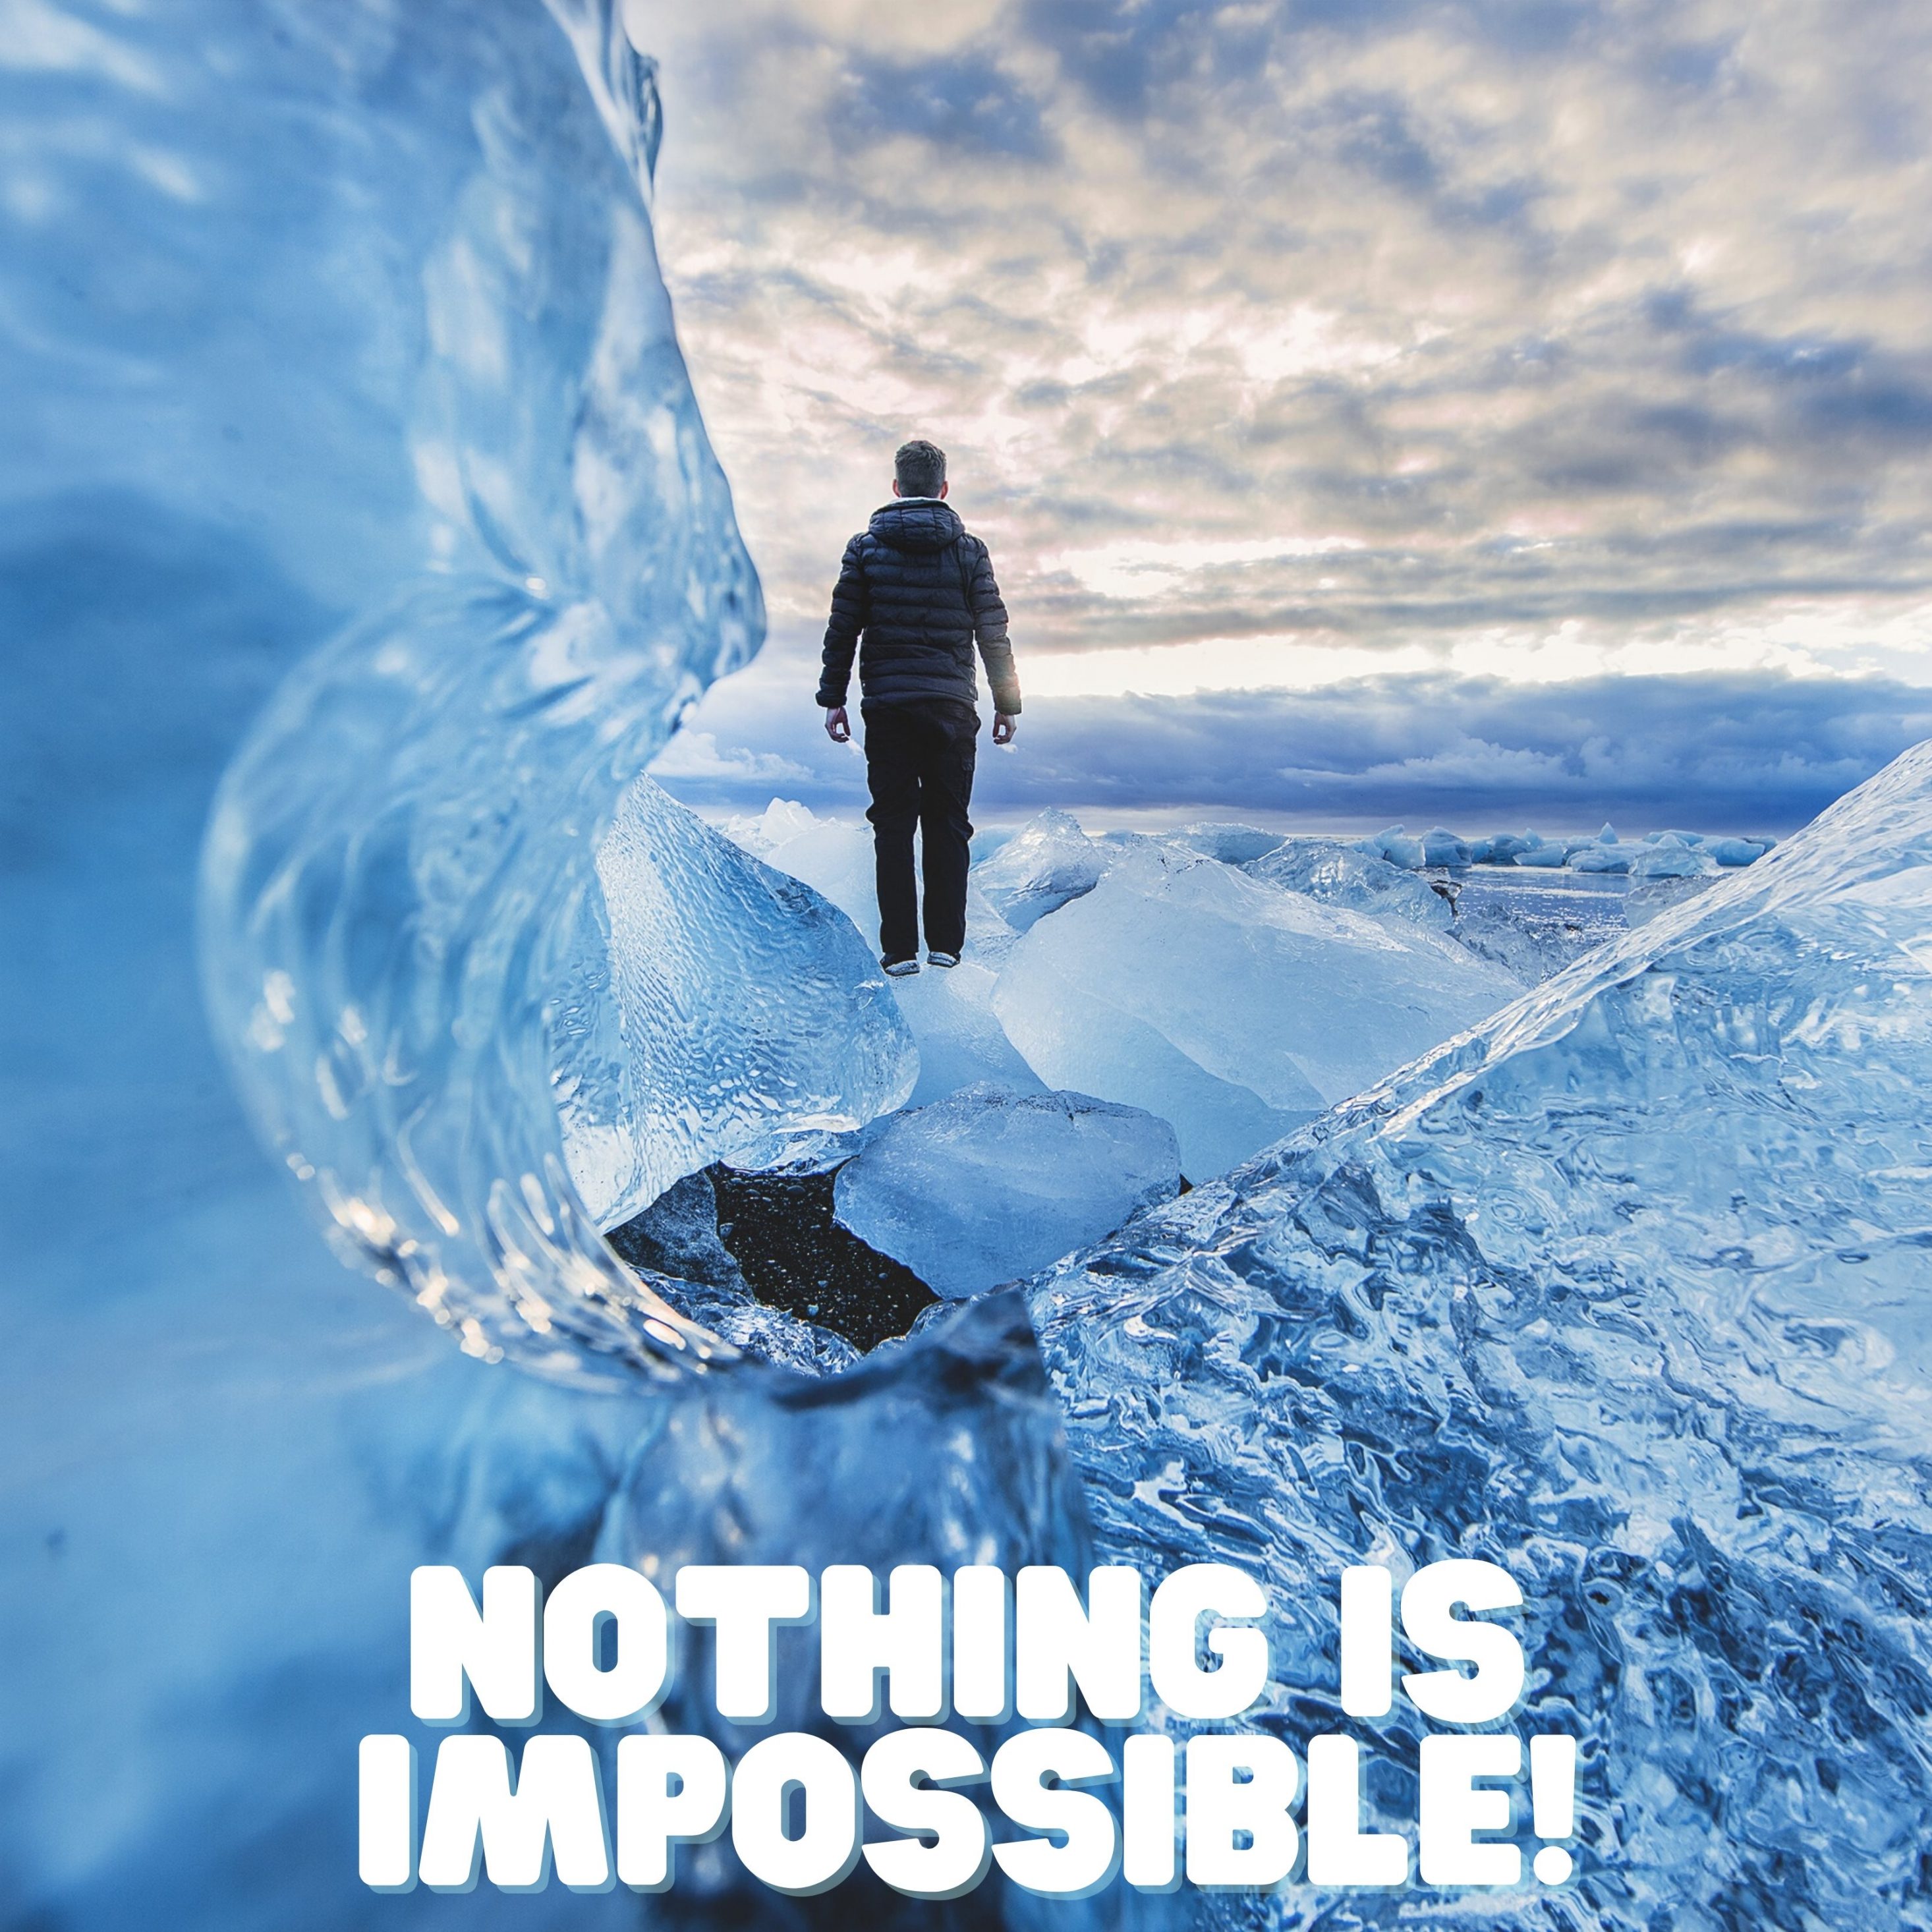 2932x2932 iPad Pro wallpaper 4k Nothing Is Impossible Quote iPad Wallpaper 2932x2932 pixels resolution